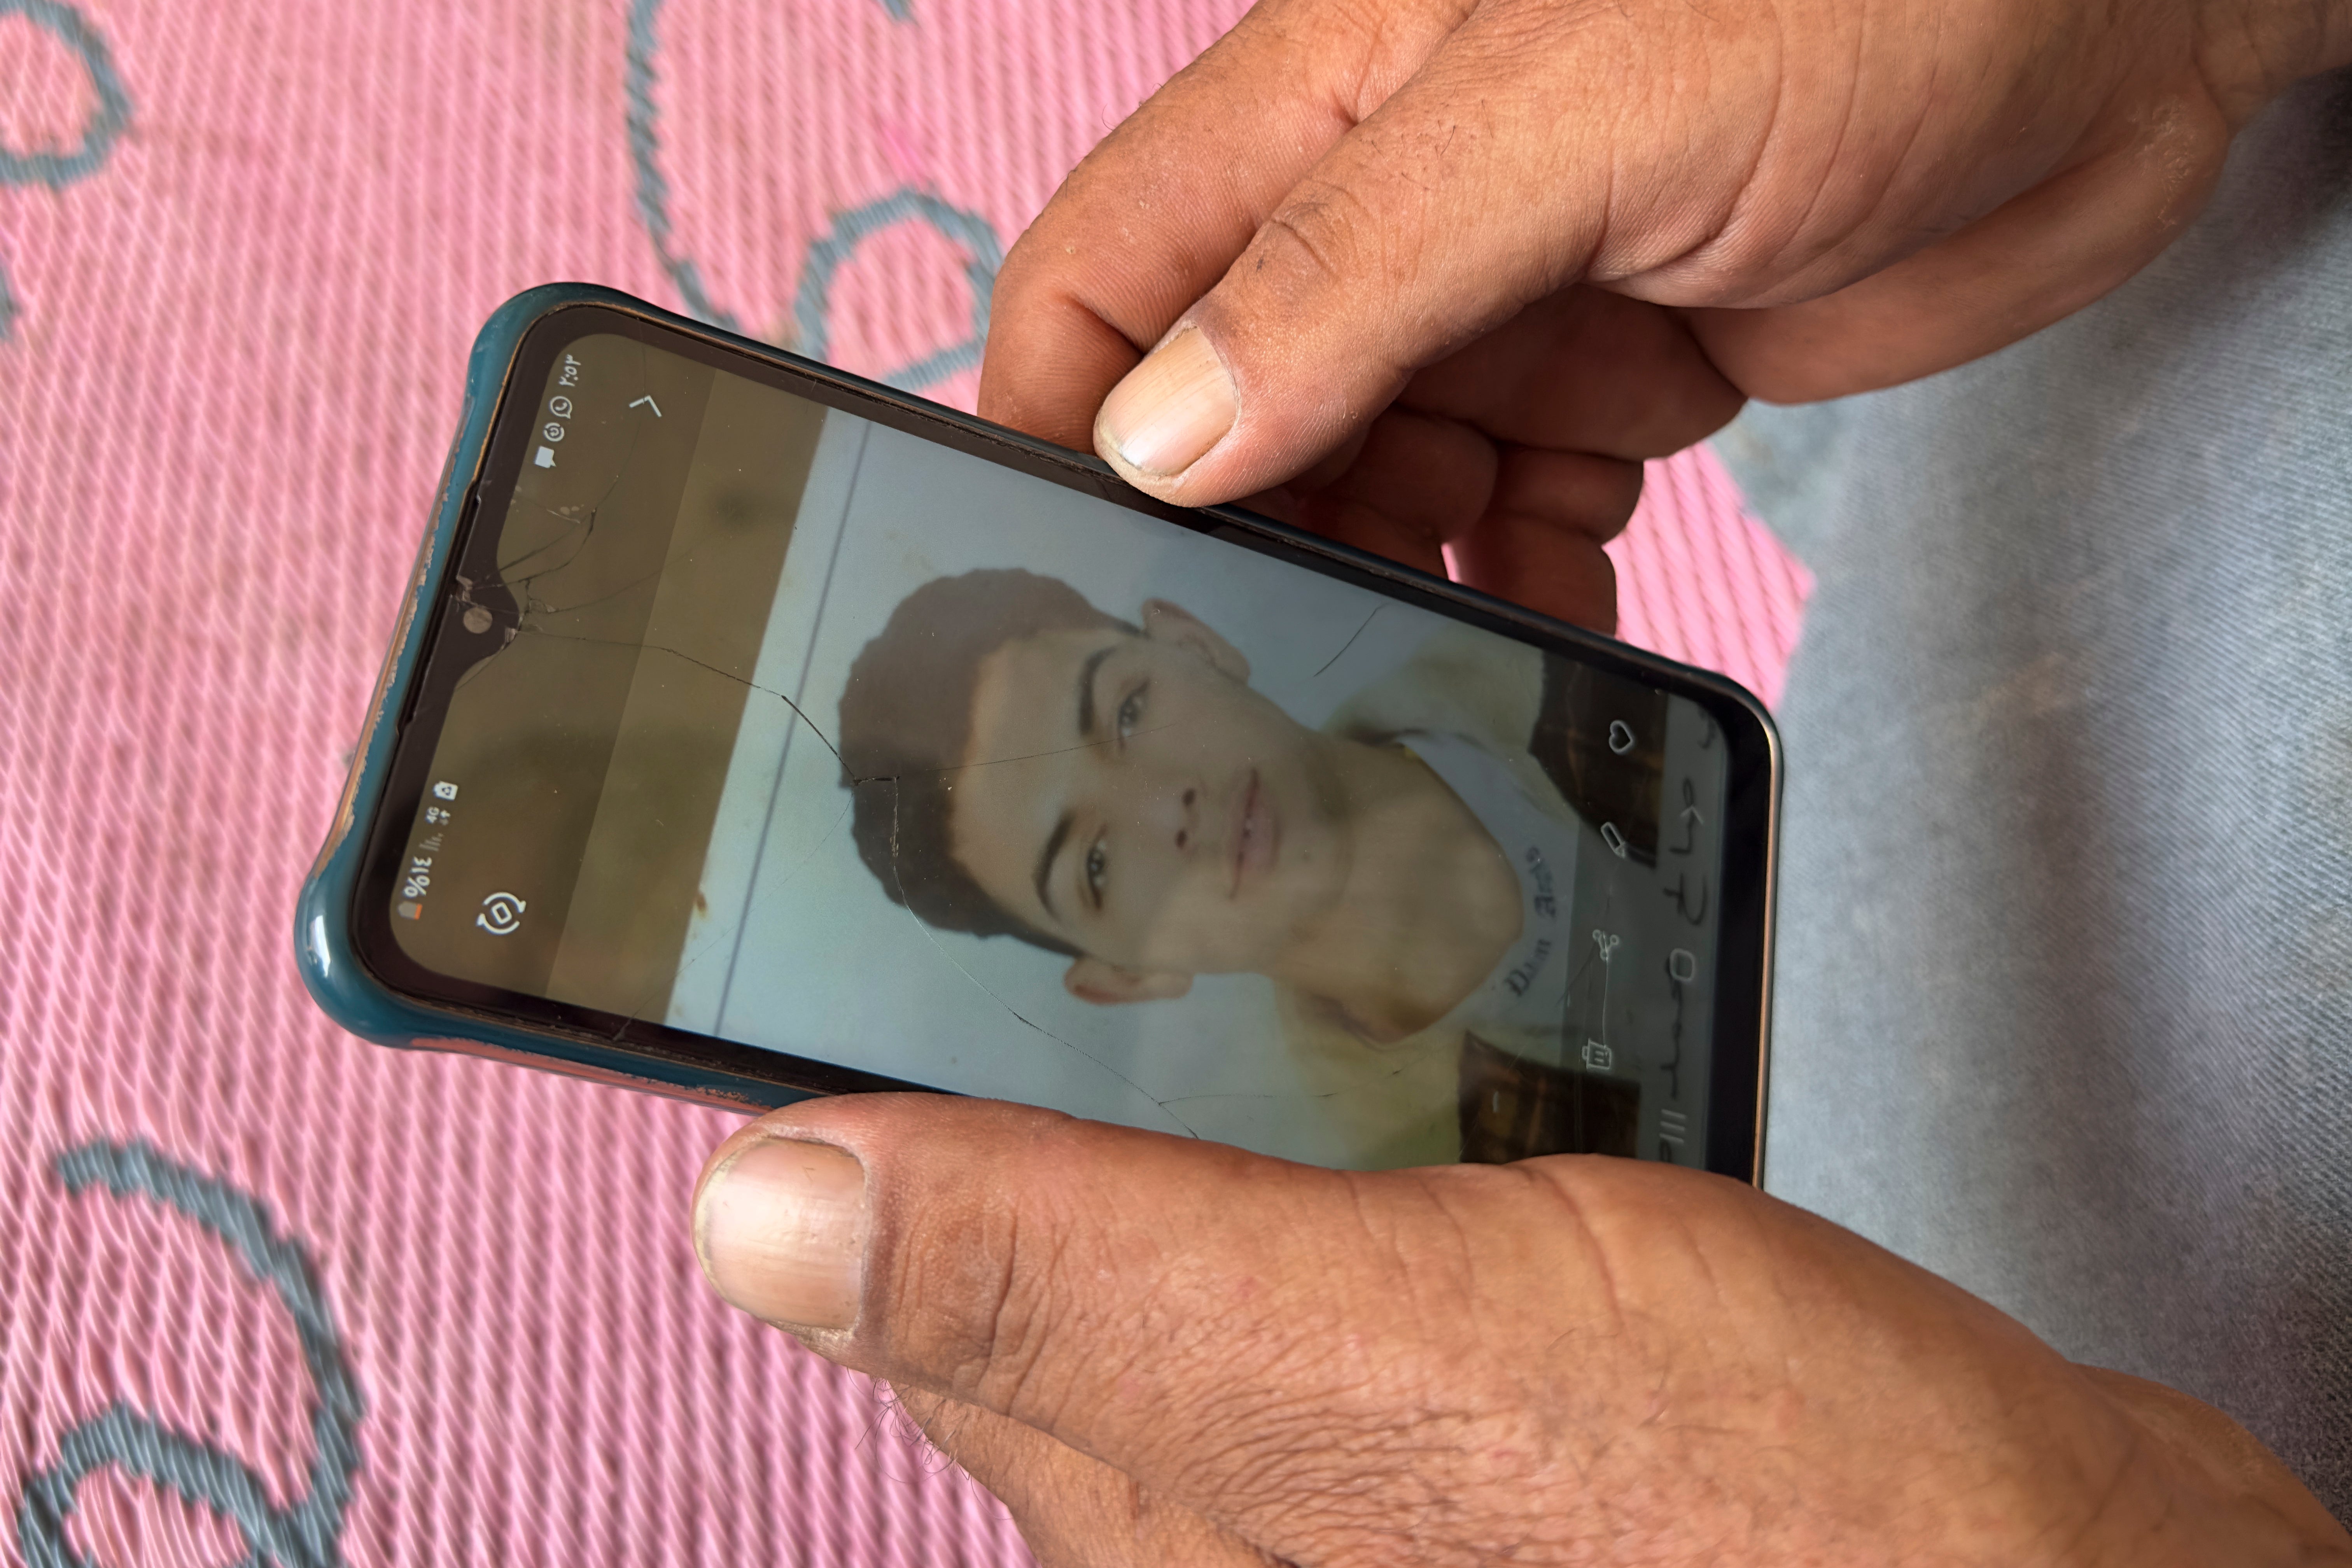 Yahia Saleh, 18, who is one of dozens from one Egyptian village feared to have drowned